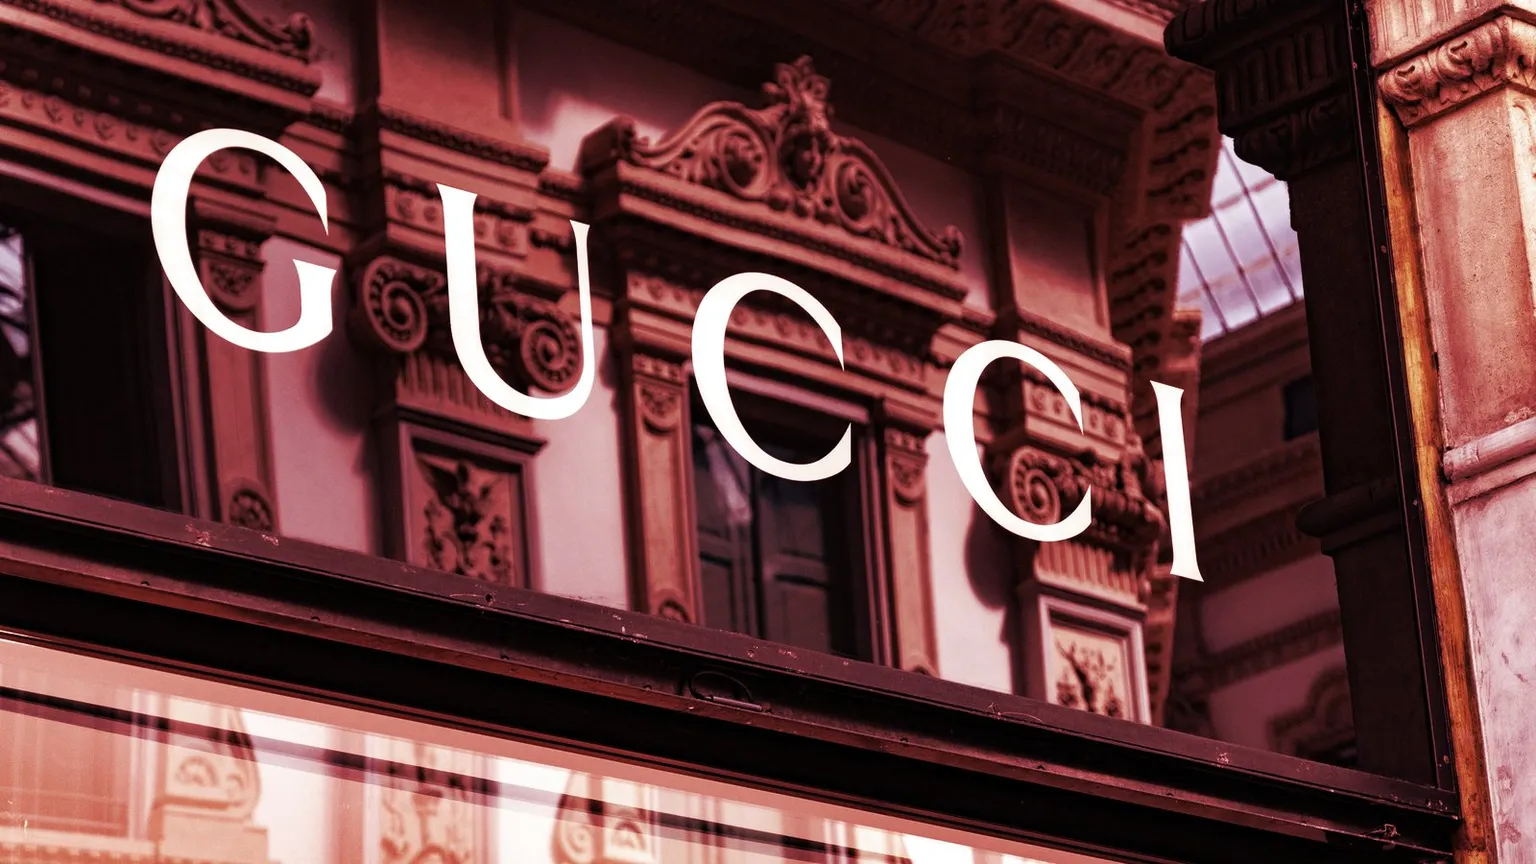 A Gucci boutique in Milan. Image: Shutterstock